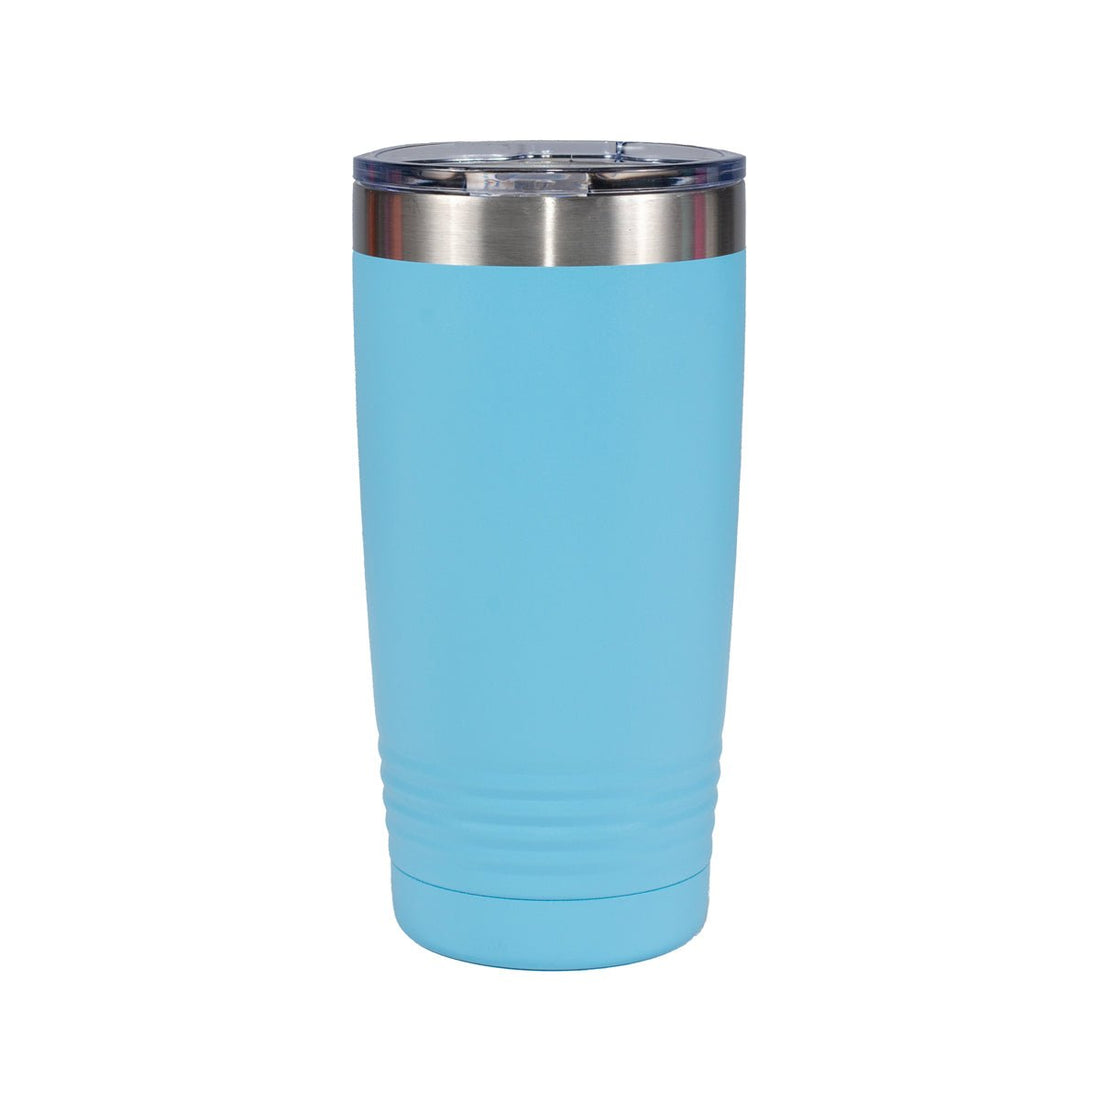 Personalized UV Printed - YOUR LOGO - 20 oz. Wine or Beverage Tumbler - 17 Colors! - ATOM Promotions